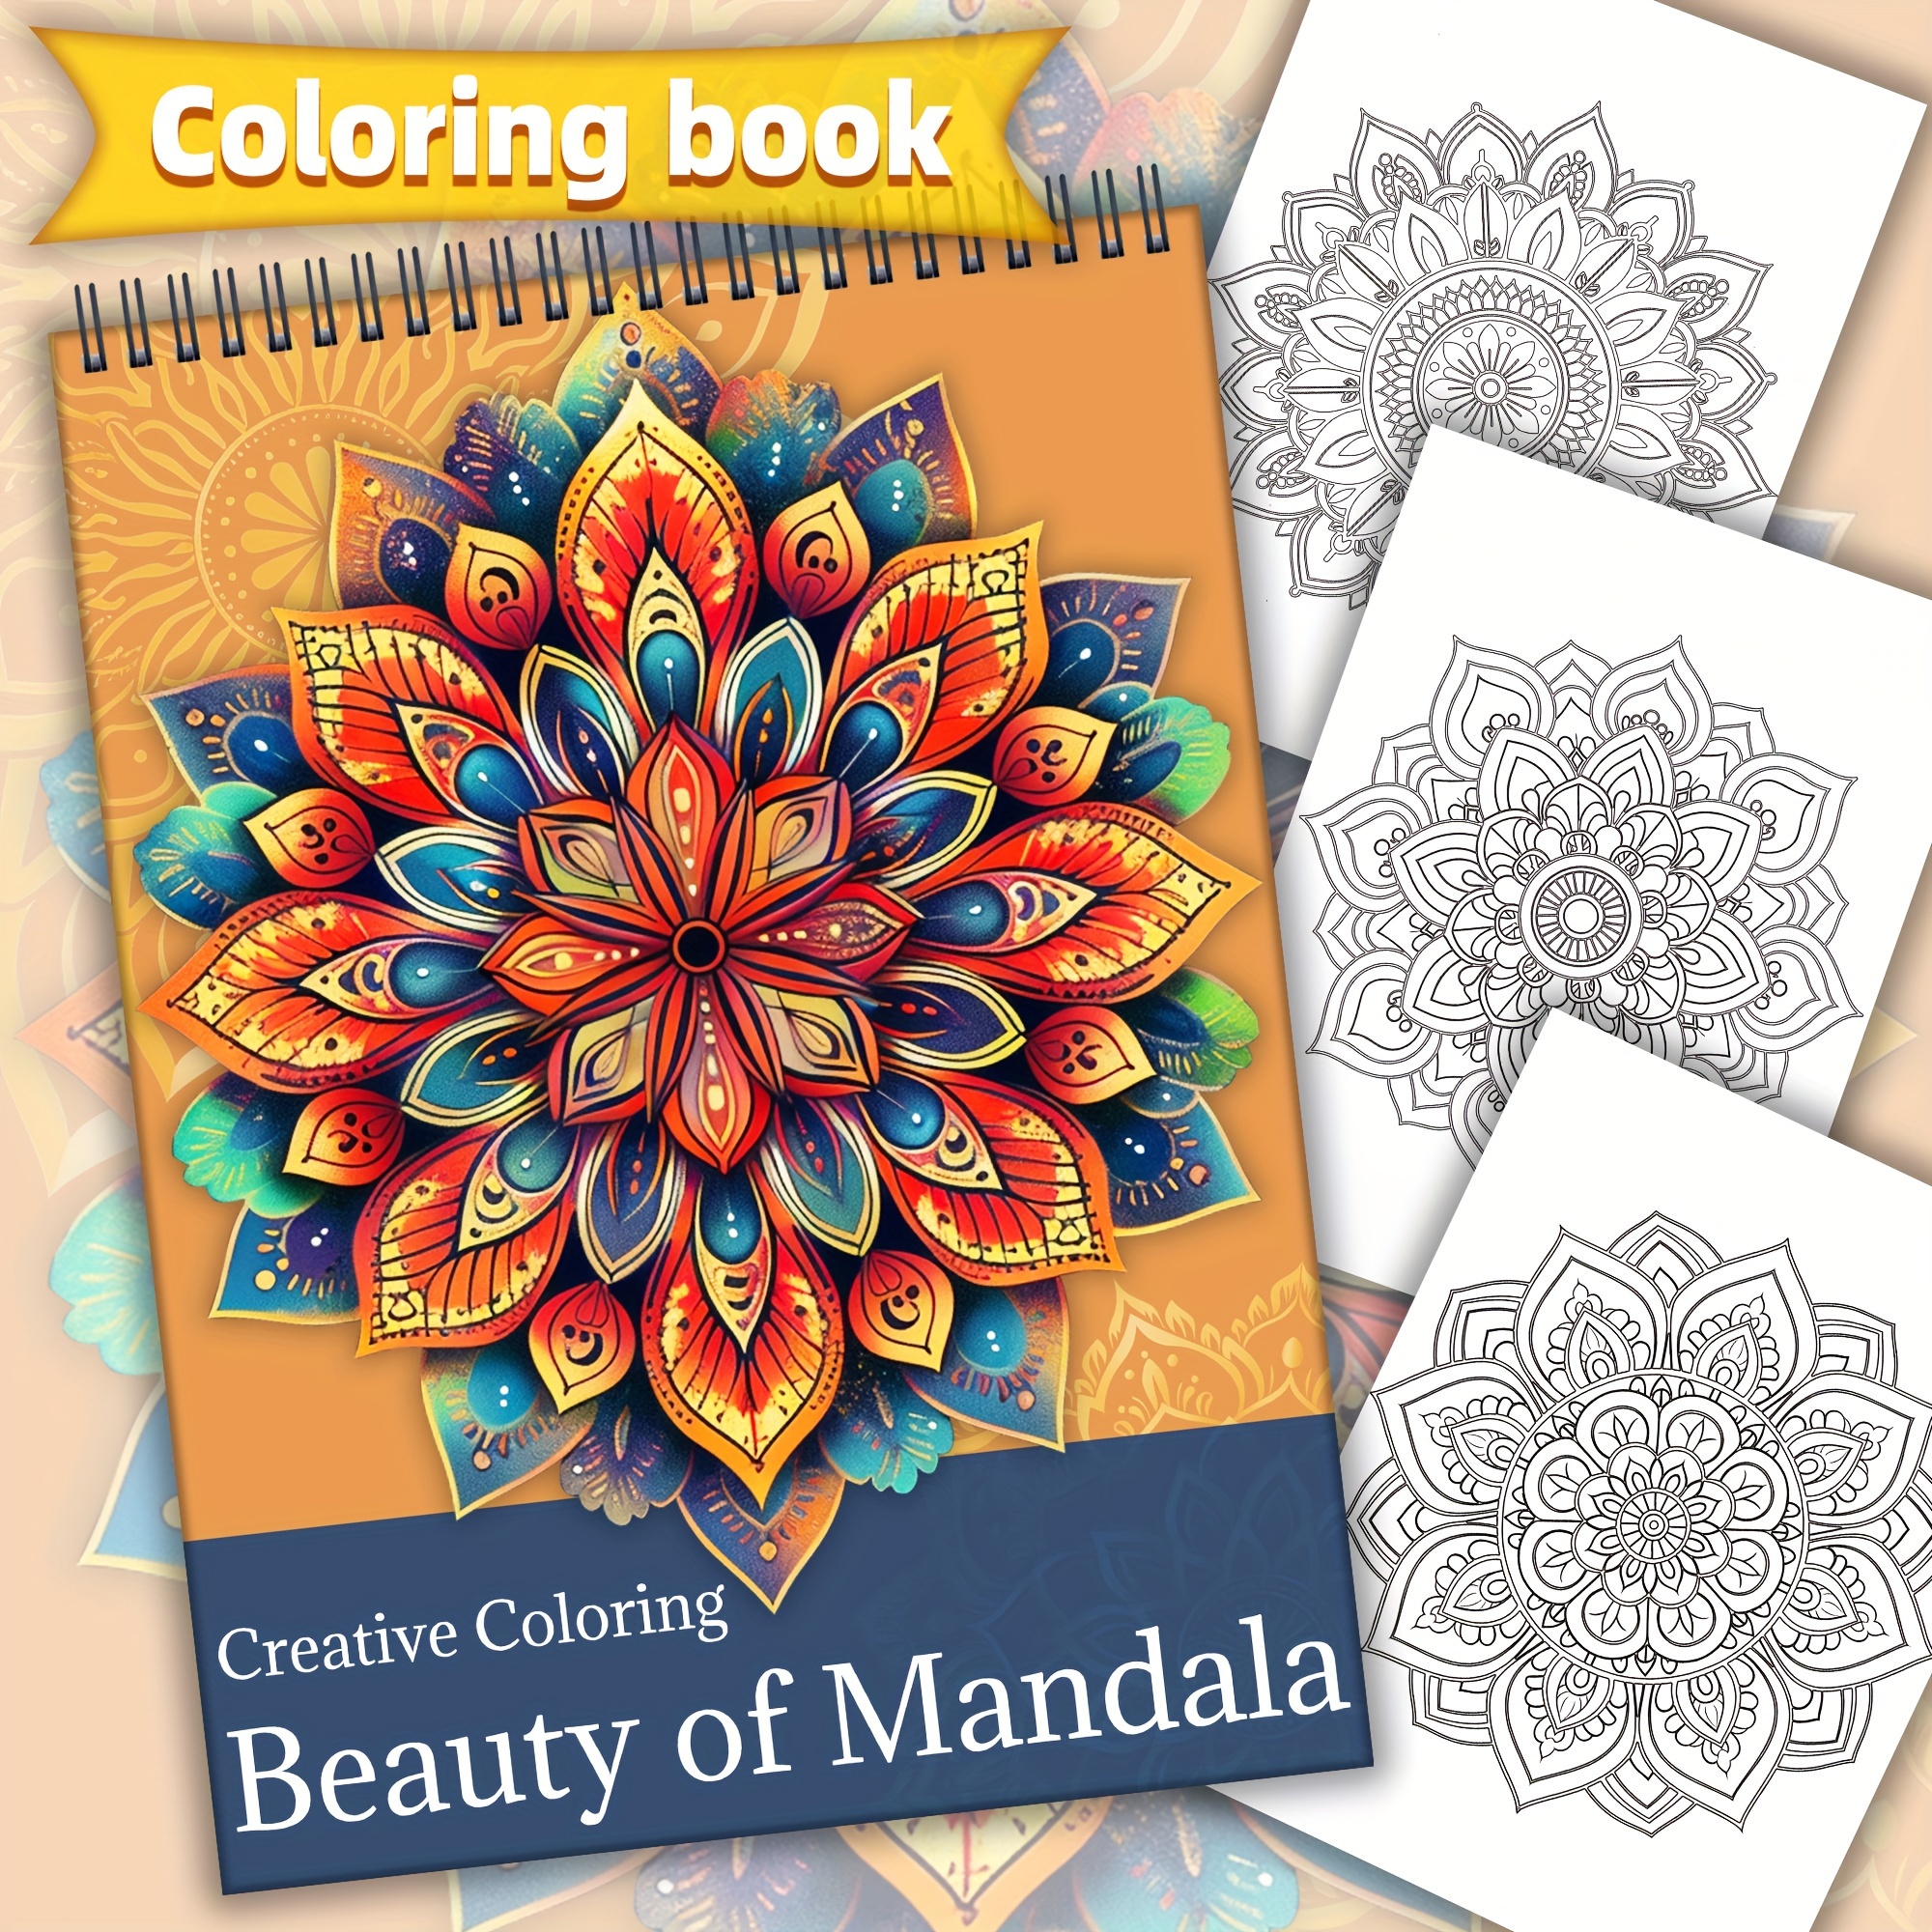 

Spiral Bound Adult Coloring Book - 24 Original Mandala Flower Designs - Beauty Of Mandala Theme - Relaxation & Creativity - Perfect Gift For Women - 11.2x8.2 Inches